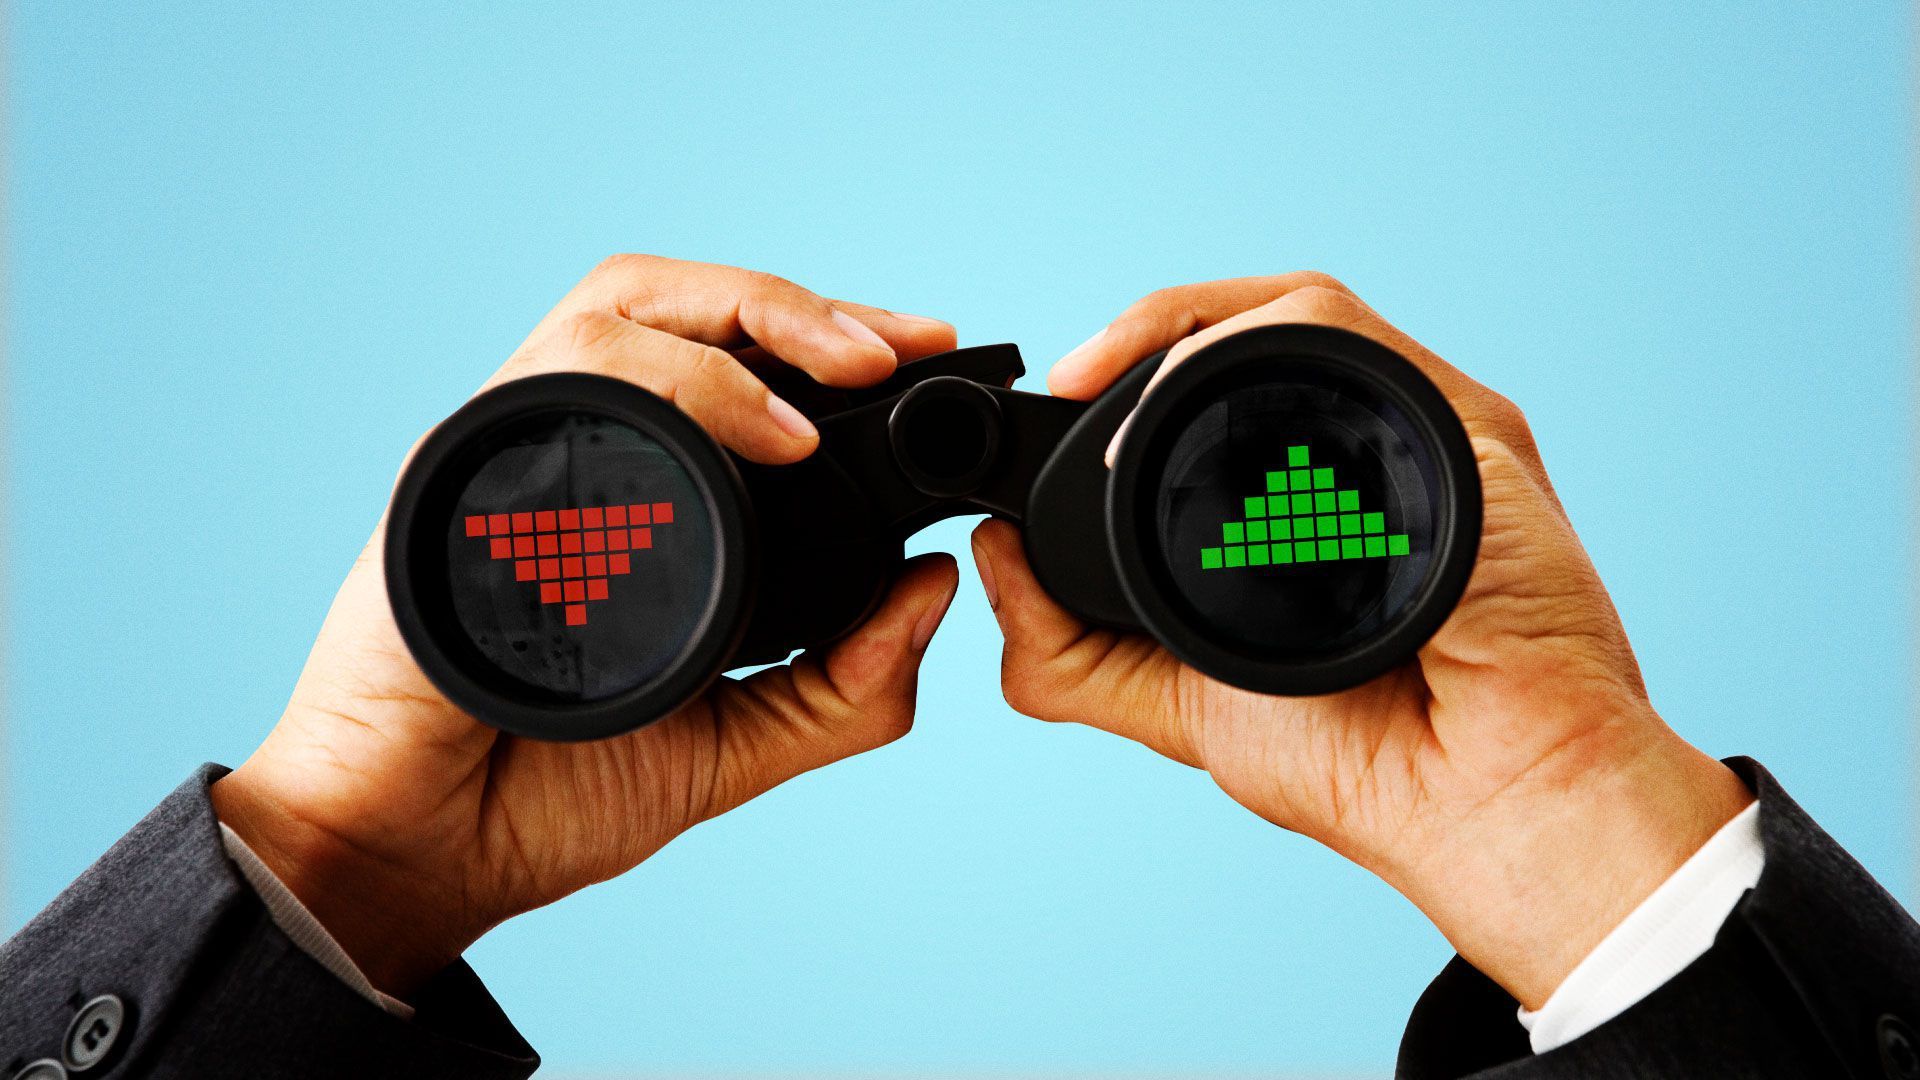 Illustration of a pair on binoculars, one lens with a red arrow down, the other with a green arrow up.